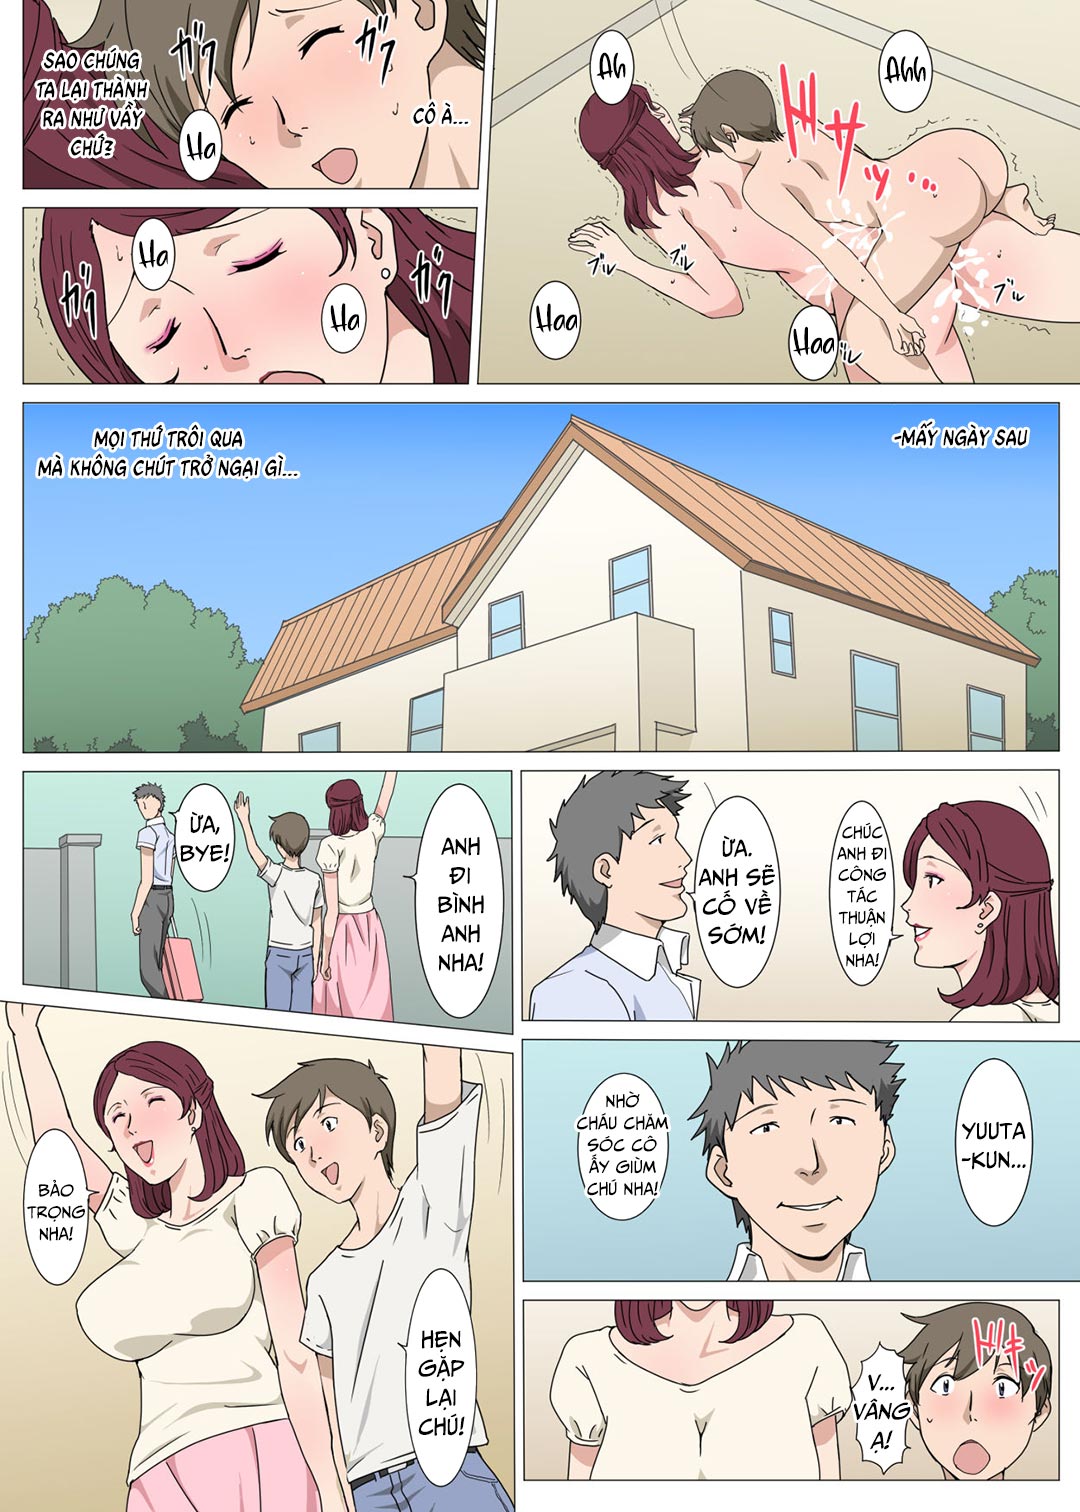 Xem ảnh The Story Of An Unspoken Sex Agreement With Oba-San - Chapter 2 END - 13 - Hentai24h.Tv